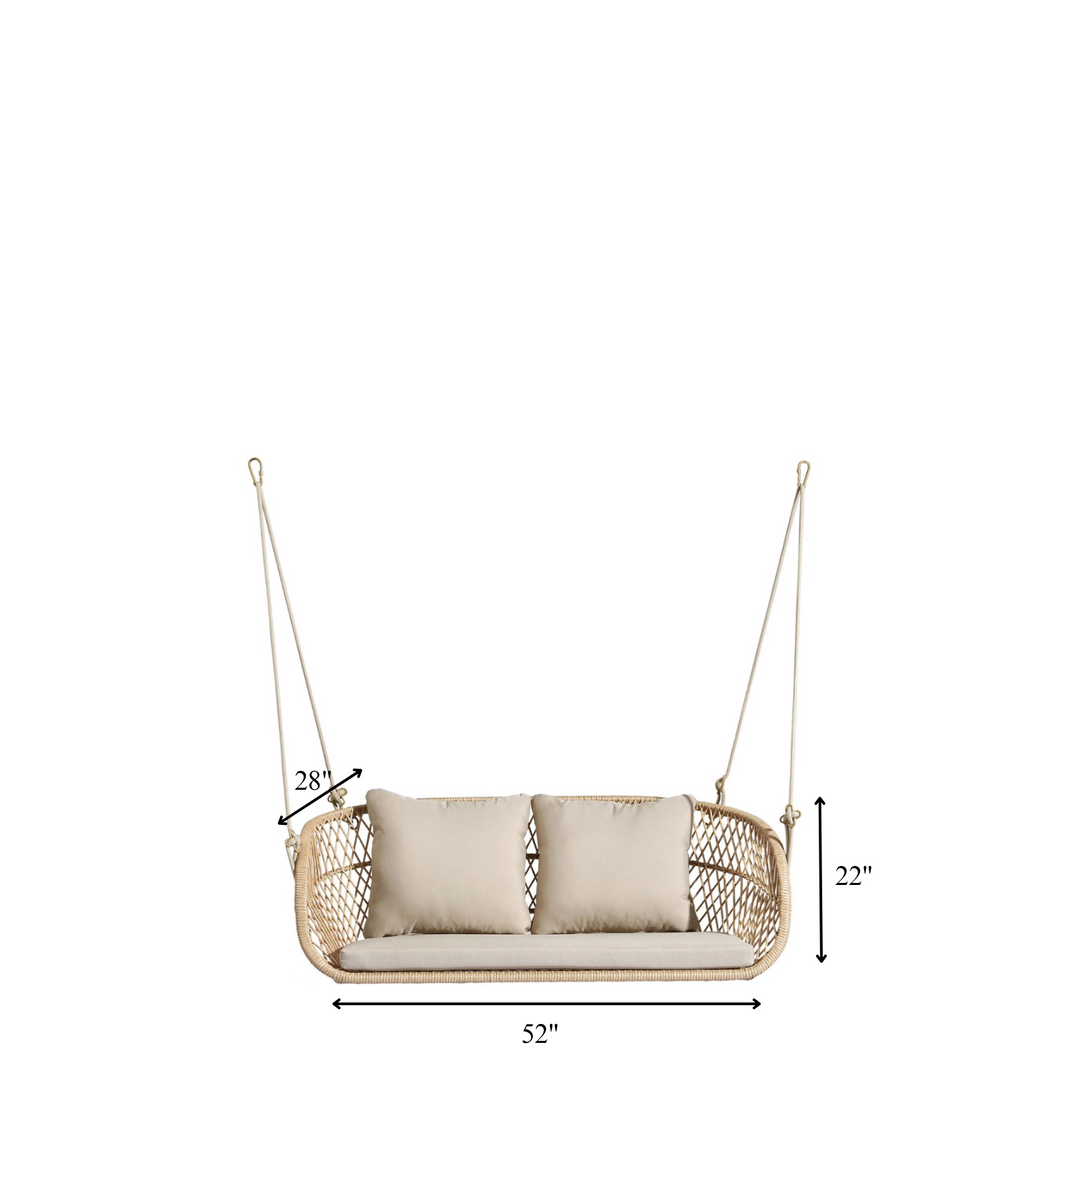 Lieu Double Seater Hanging Swing Without Stand For Balcony , Garden Swing (Honey)